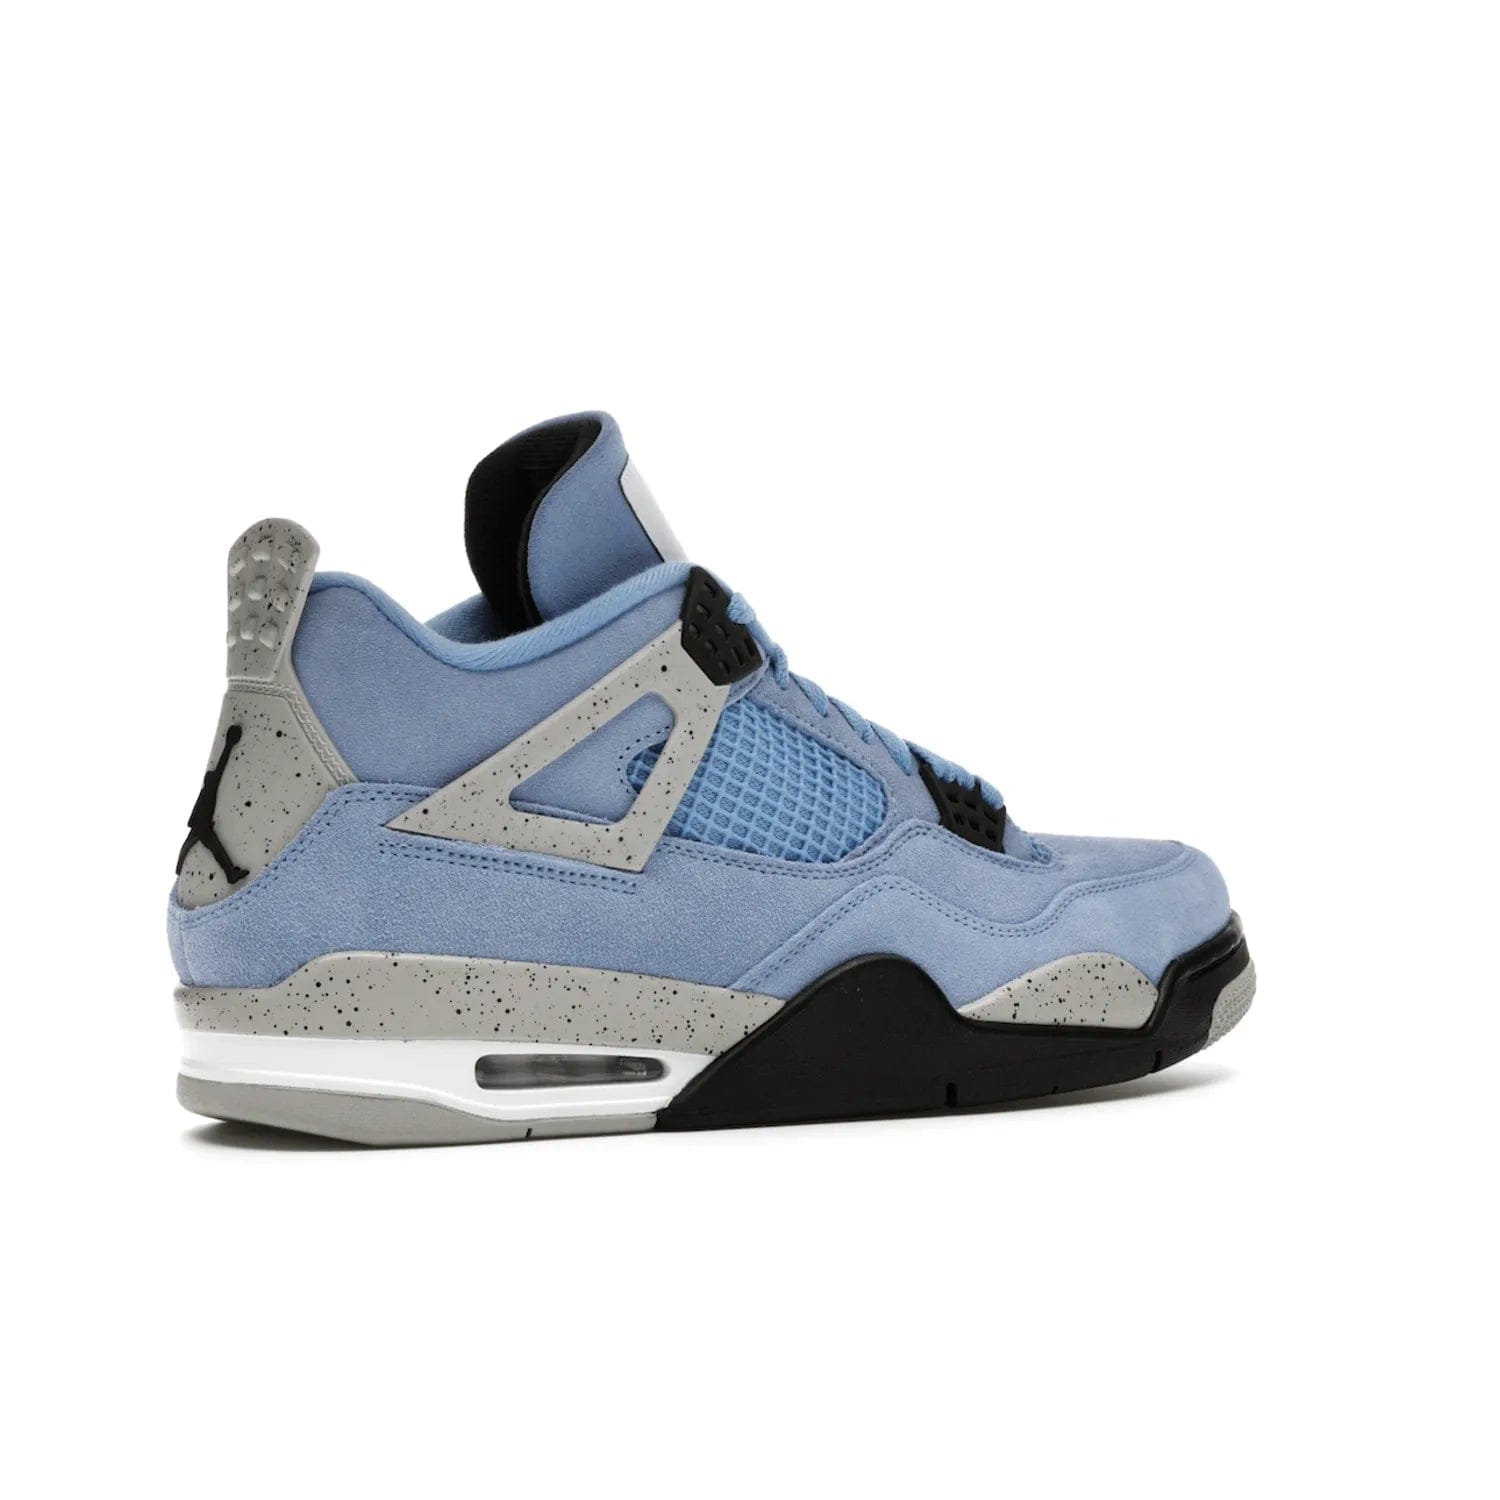 Jordan 4 Retro University Blue - Image 34 - Only at www.BallersClubKickz.com - The Air Jordan 4 University Blue honors MJ's alma mater. Rich University Blue suede, panels of netting, and Cement Grey speckled eyelets give this design an edgy look. Features a black, white and Tech Grey sole with a clear Air unit and two woven labels on the tongue. Jumpman logo & Team Jordan jock tag included. Released April 2021.